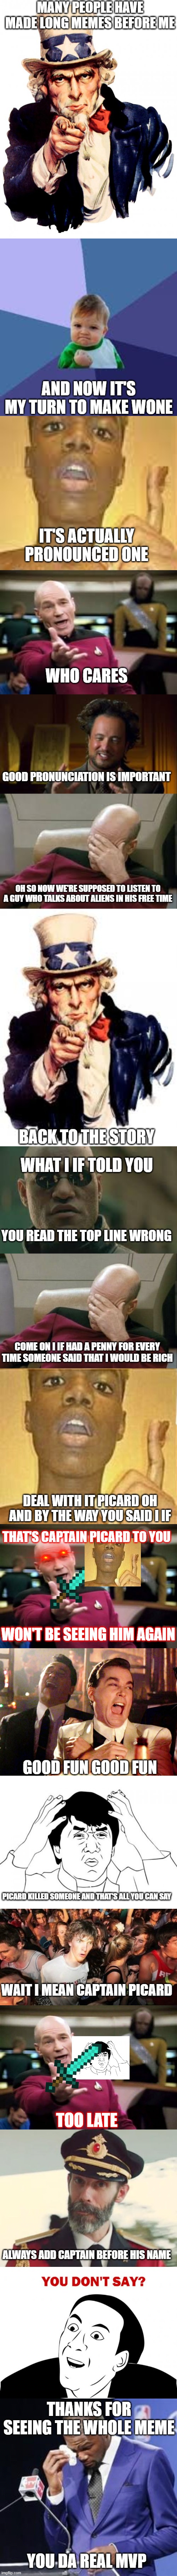 seriously picard wait i mean captain picard oops | MANY PEOPLE HAVE MADE LONG MEMES BEFORE ME; AND NOW IT'S MY TURN TO MAKE WONE; IT'S ACTUALLY PRONOUNCED ONE; WHO CARES; GOOD PRONUNCIATION IS IMPORTANT; OH SO NOW WE'RE SUPPOSED TO LISTEN TO A GUY WHO TALKS ABOUT ALIENS IN HIS FREE TIME; BACK TO THE STORY; WHAT I IF TOLD YOU; YOU READ THE TOP LINE WRONG; COME ON I IF HAD A PENNY FOR EVERY TIME SOMEONE SAID THAT I WOULD BE RICH; DEAL WITH IT PICARD OH AND BY THE WAY YOU SAID I IF; THAT'S CAPTAIN PICARD TO YOU; WON'T BE SEEING HIM AGAIN; GOOD FUN GOOD FUN; PICARD KILLED SOMEONE AND THAT'S ALL YOU CAN SAY; WAIT I MEAN CAPTAIN PICARD; TOO LATE; ALWAYS ADD CAPTAIN BEFORE HIS NAME; THANKS FOR SEEING THE WHOLE MEME; YOU DA REAL MVP | image tagged in memes,uncle sam,sudden clarity clarence,picard wtf,jackie chan wtf,you don't say | made w/ Imgflip meme maker